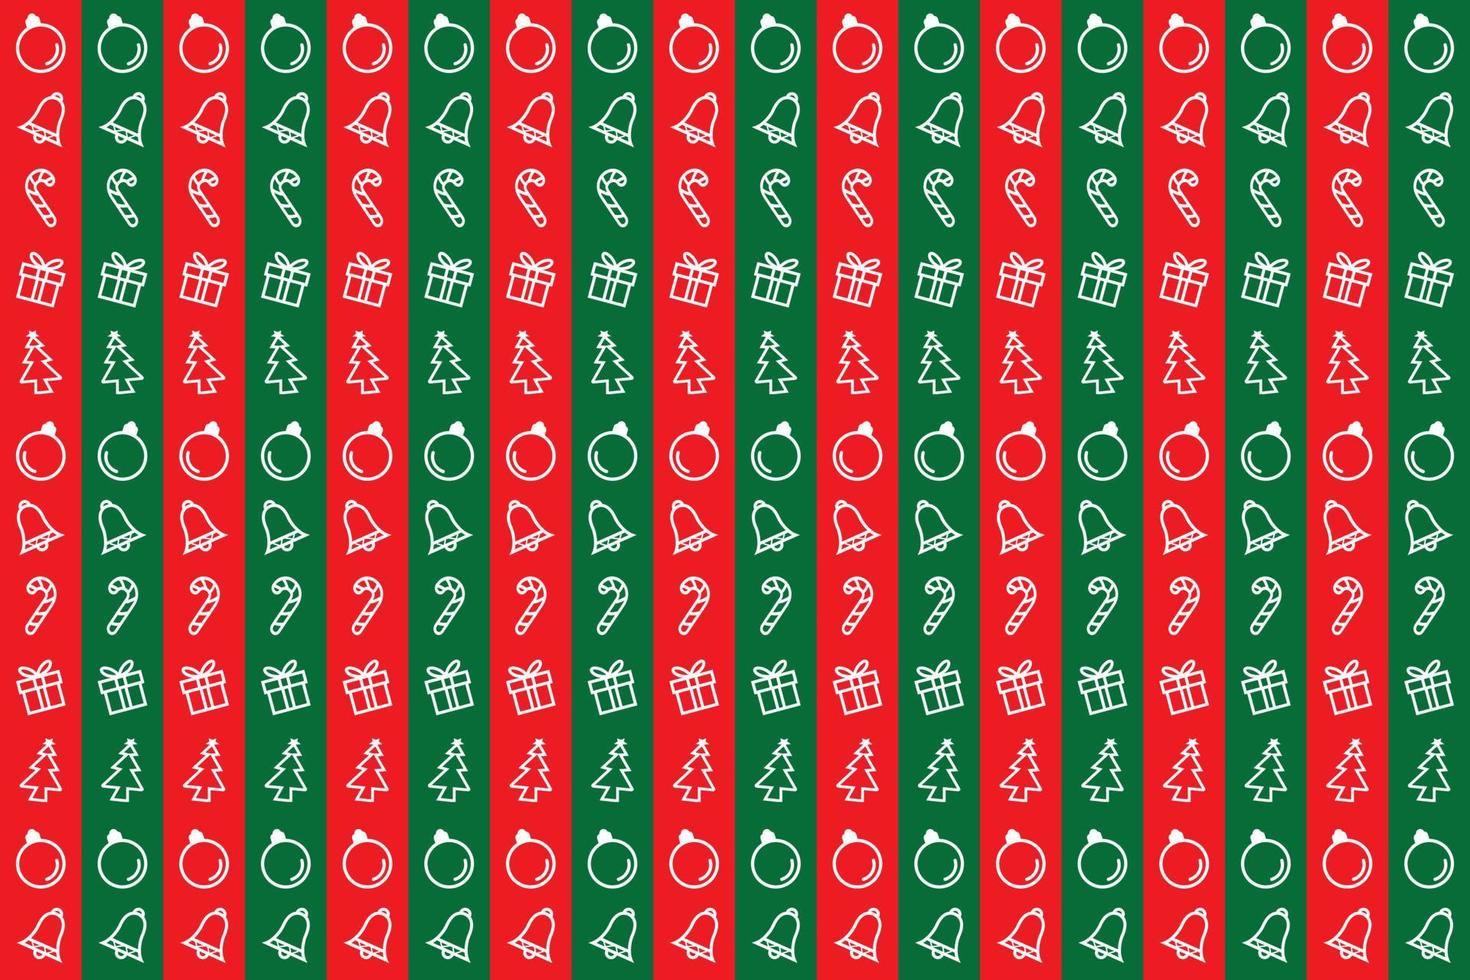 Beautiful red and green pattern background with illustration of Christmas decorative objects for holidays vector